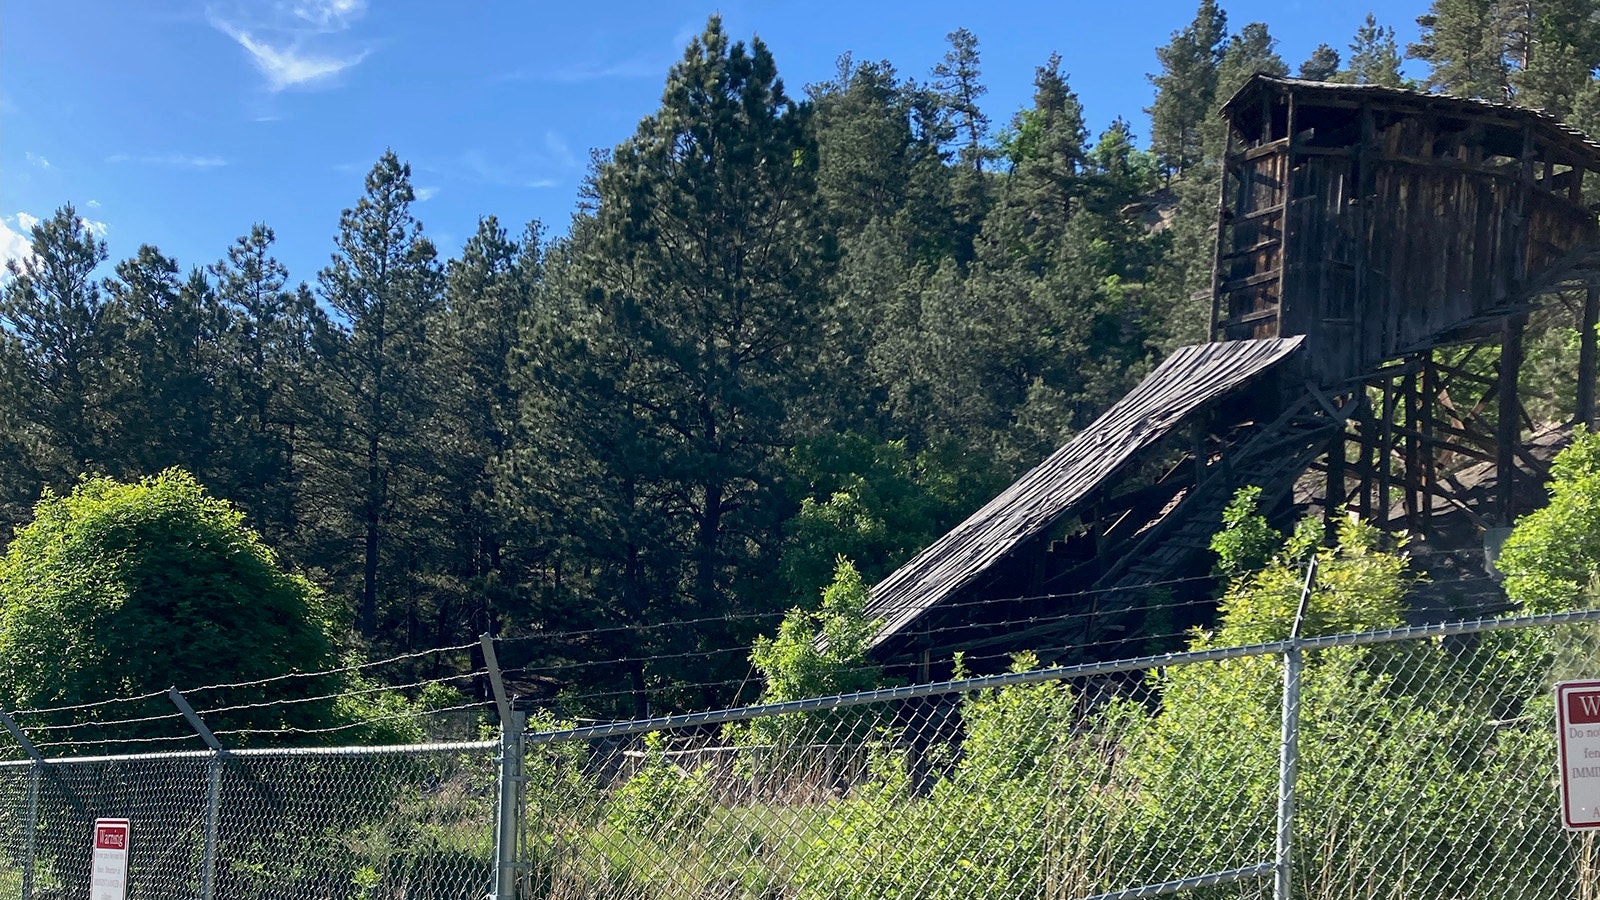 Built between 1888 and 1895, the Aladdin Coal Tipple in northeast Wyoming is one of the remaining wooden coal tipples still standing in the Western United States, but it's in bad shape and could collapse at any time.